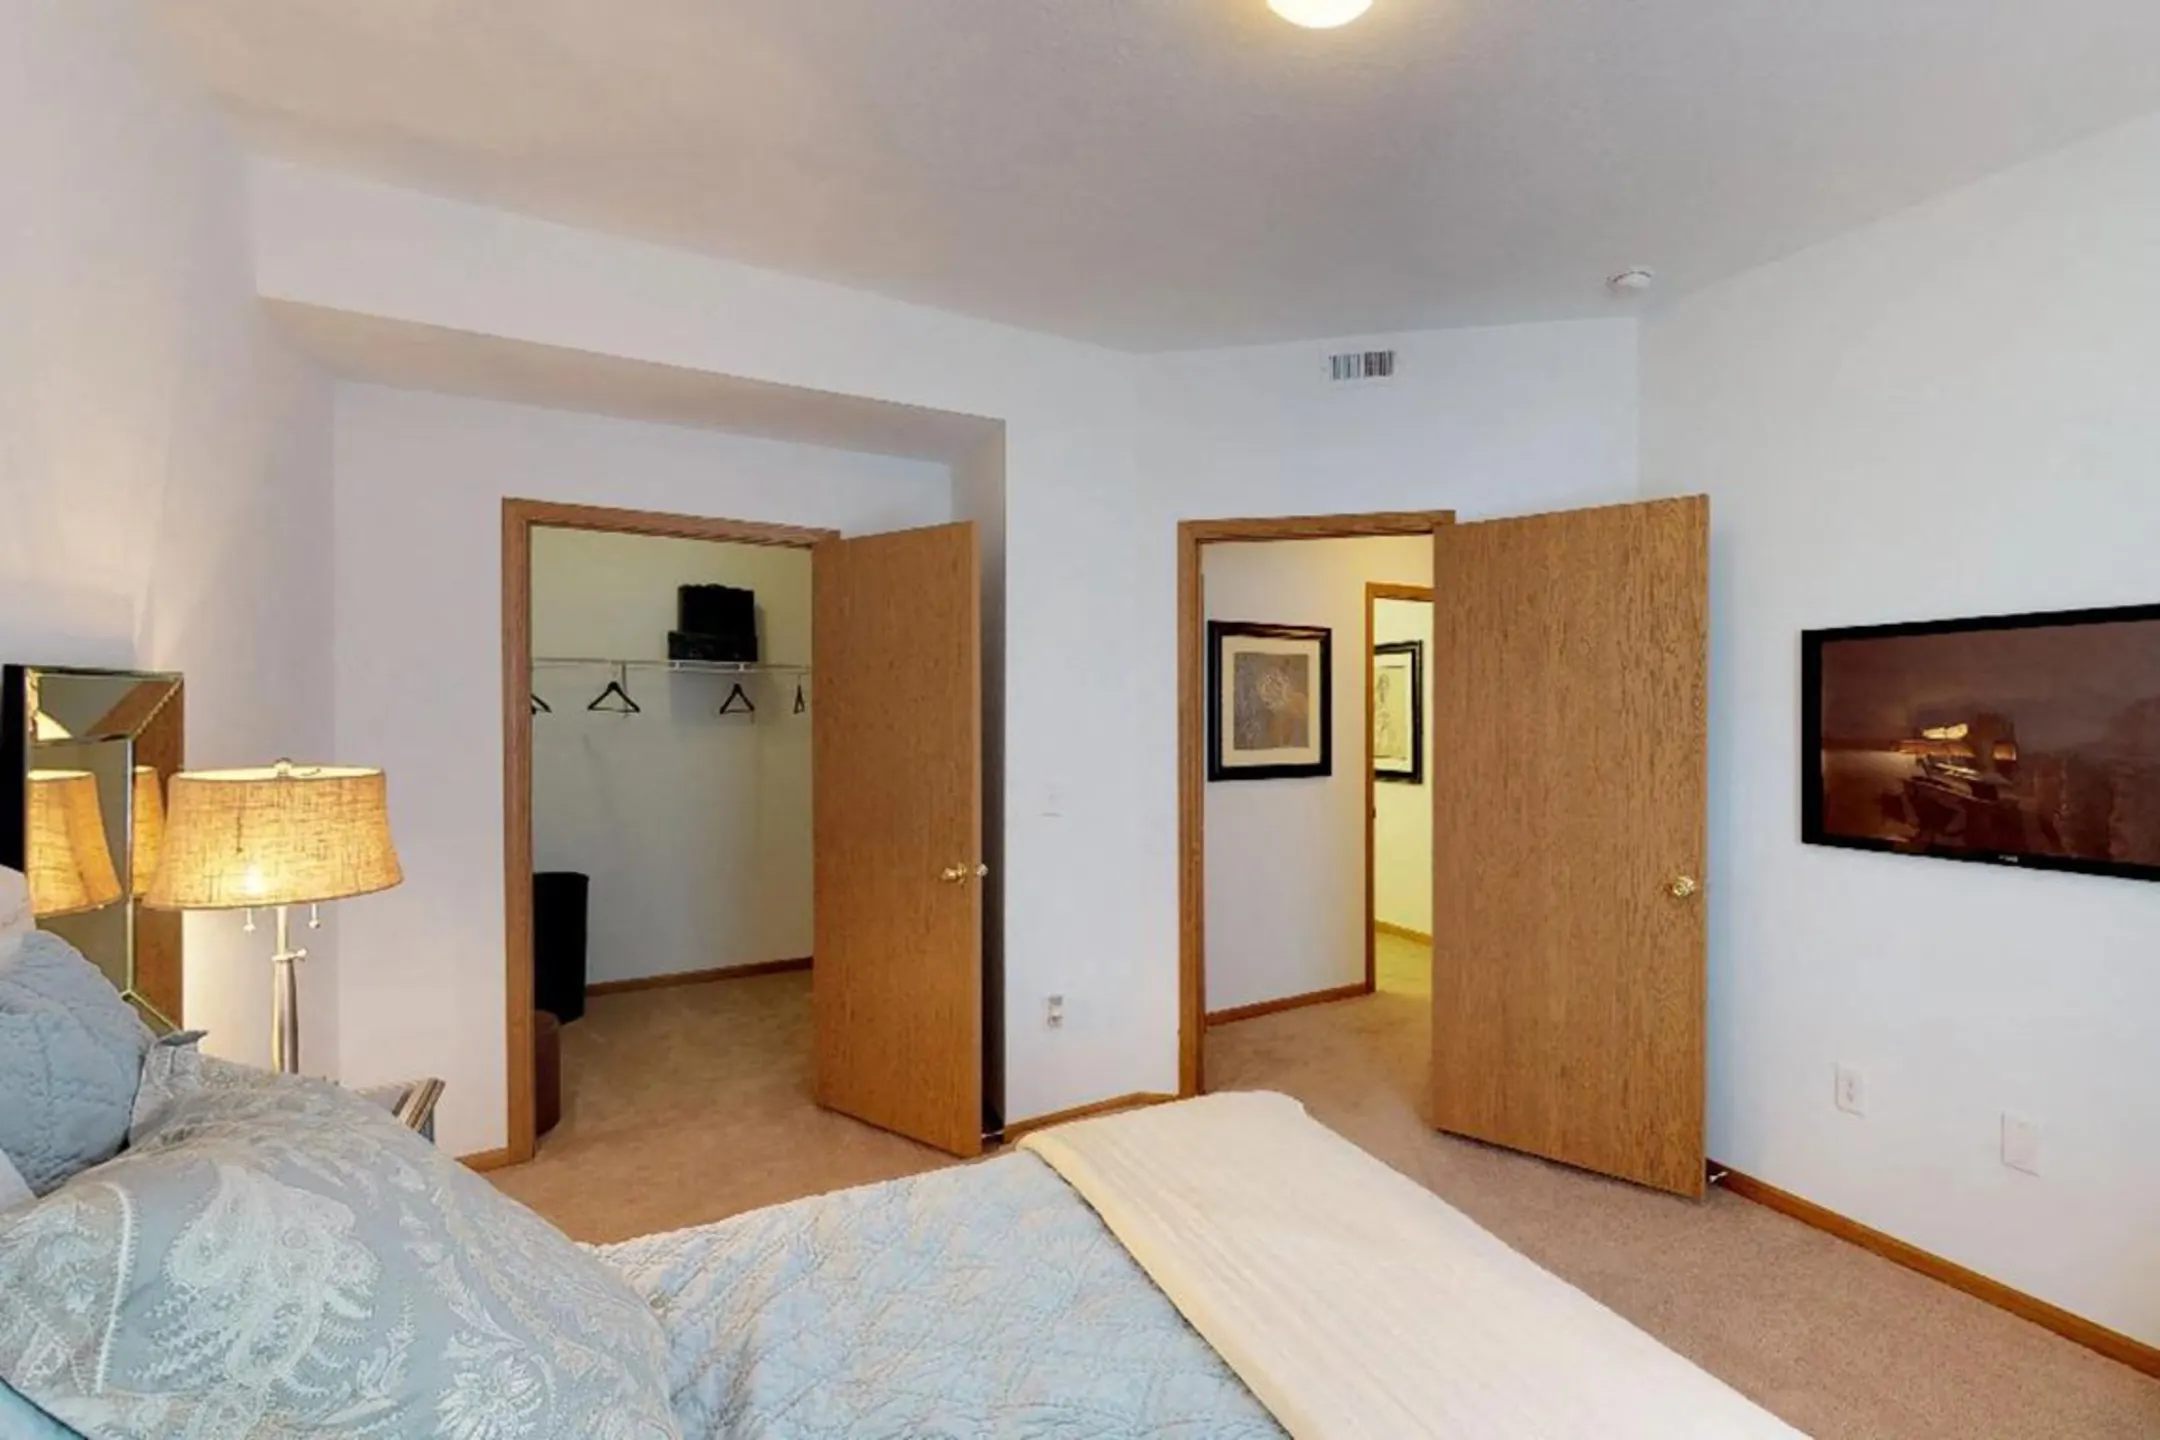 Bedroom - Brookfield Village Apartments - Grove City, OH